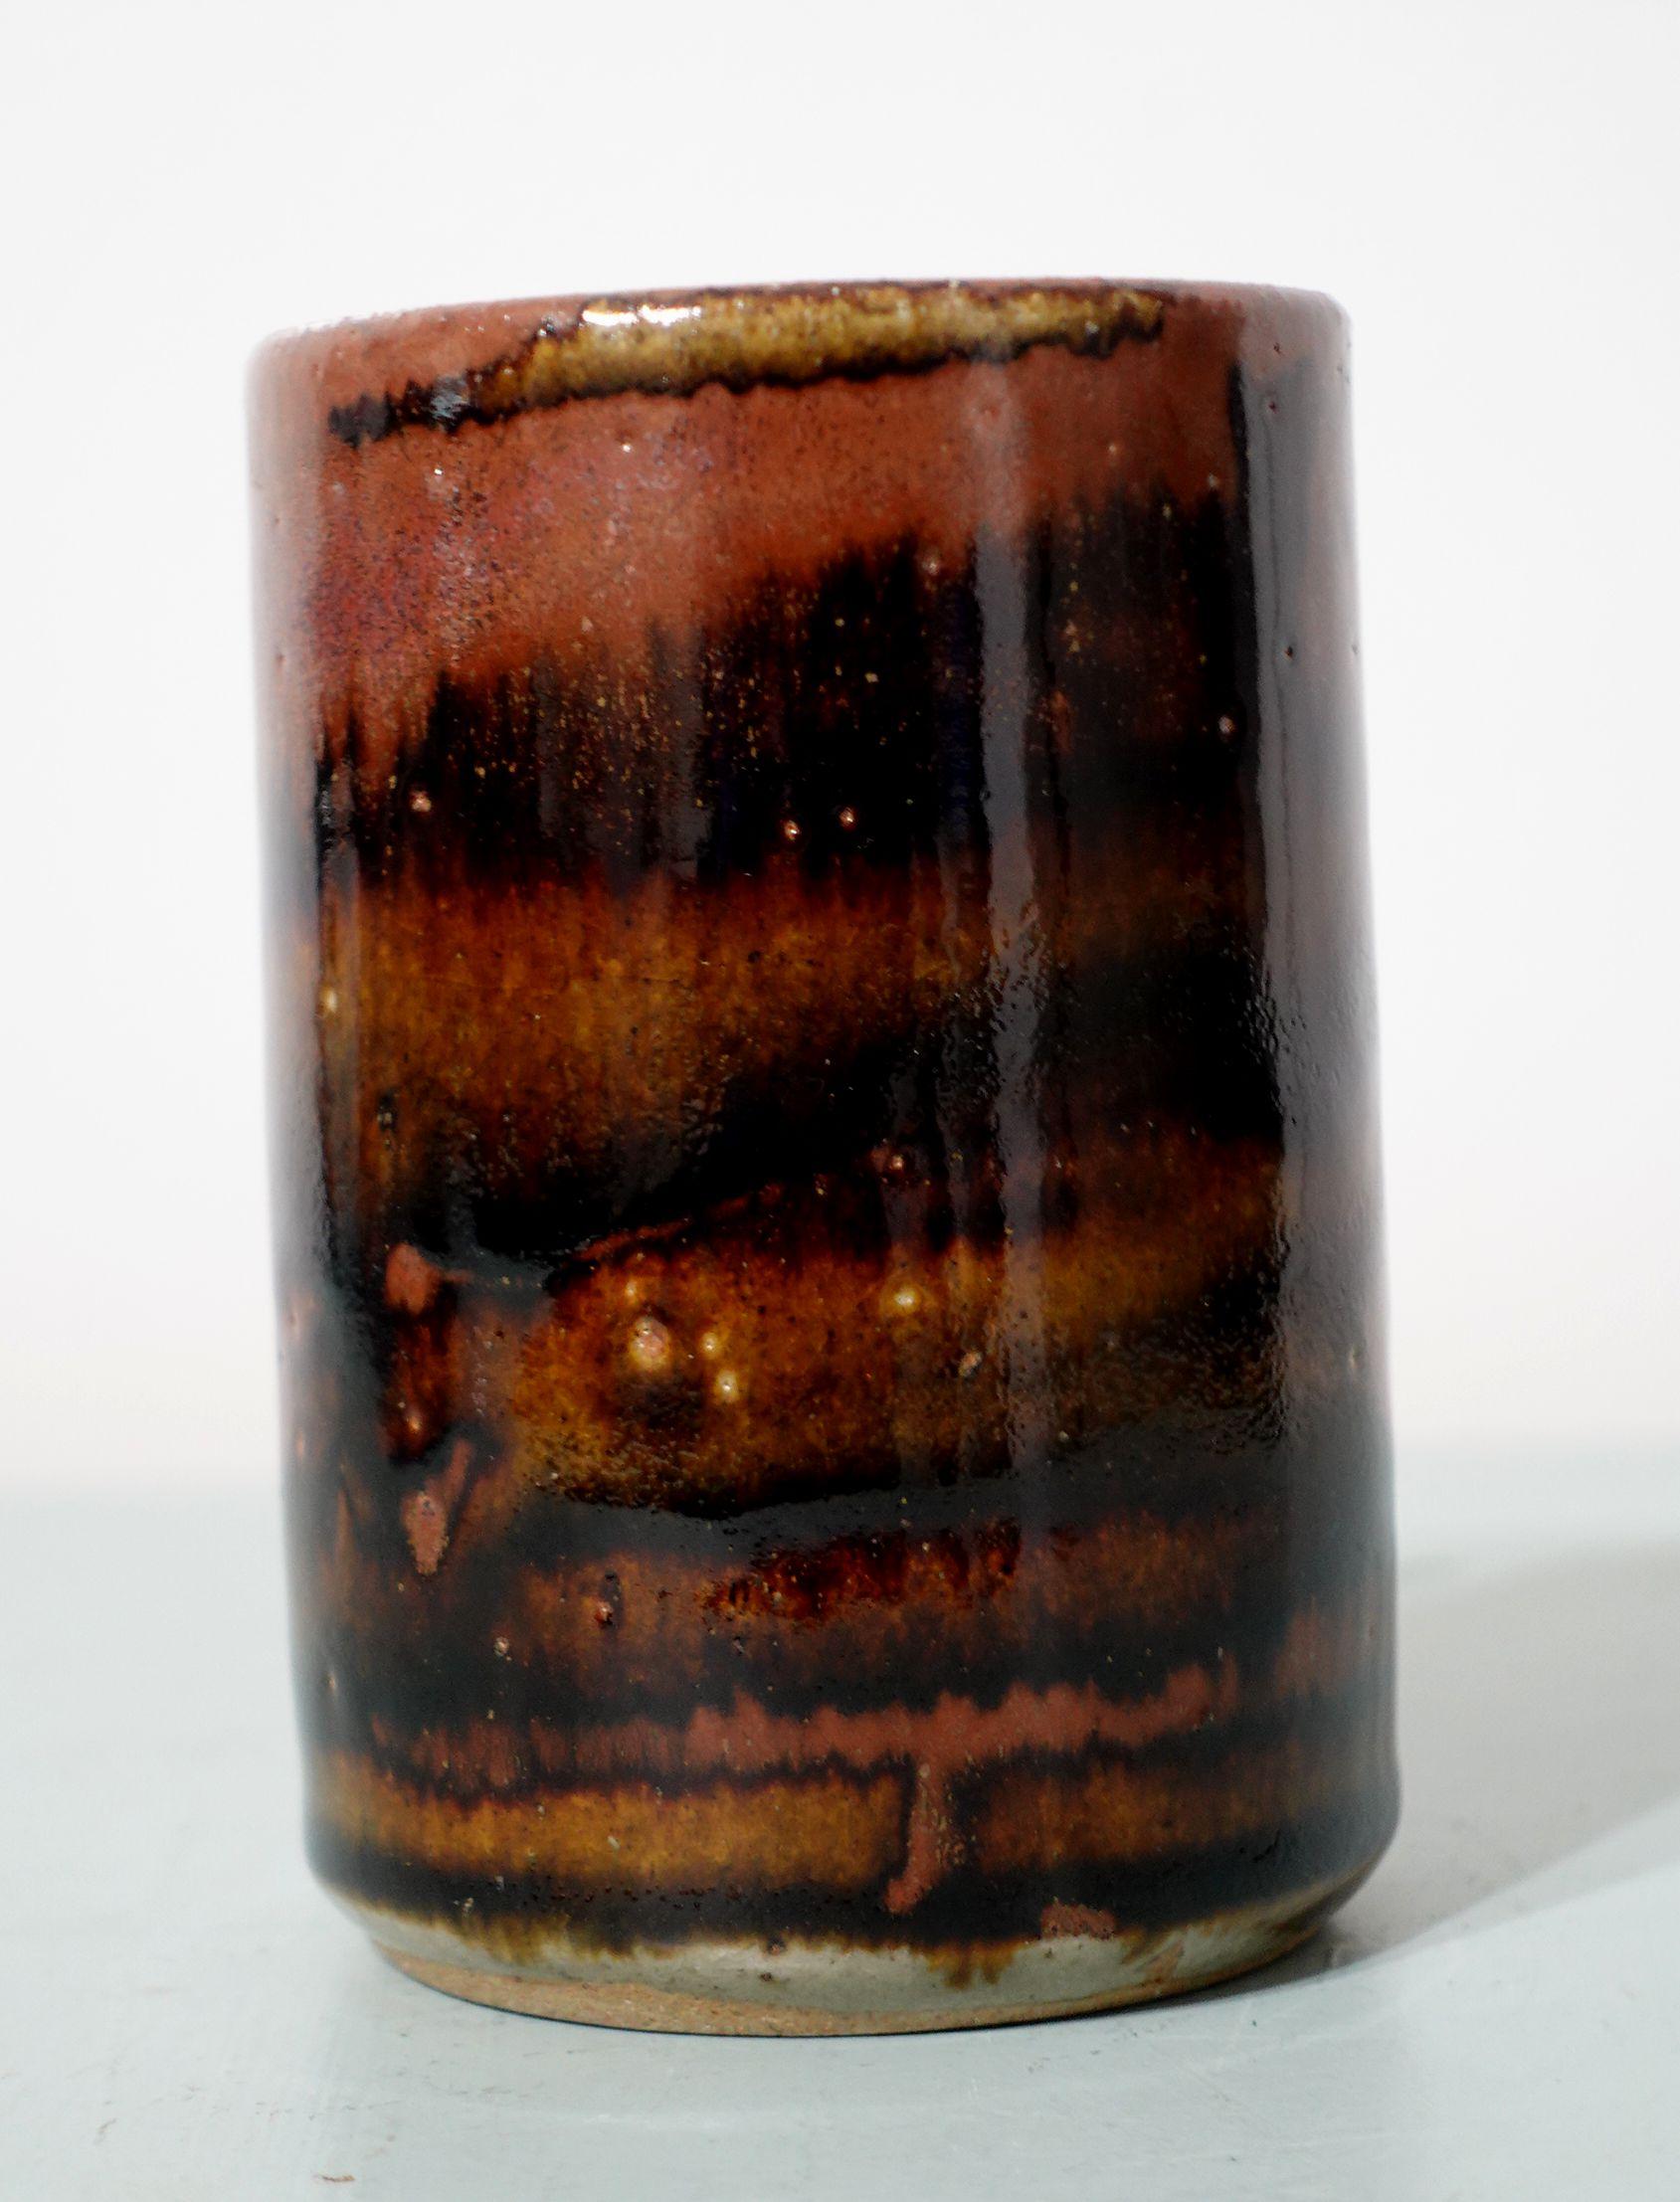 A Japanese Mashiko Cup studio pottery with stylized designs in the brown glazed body in the manner of cloud-water flowing pattern and dating from around the 1950s. The large cylindrical-shaped cup stands on a thick rounded non-unglazed foot with the